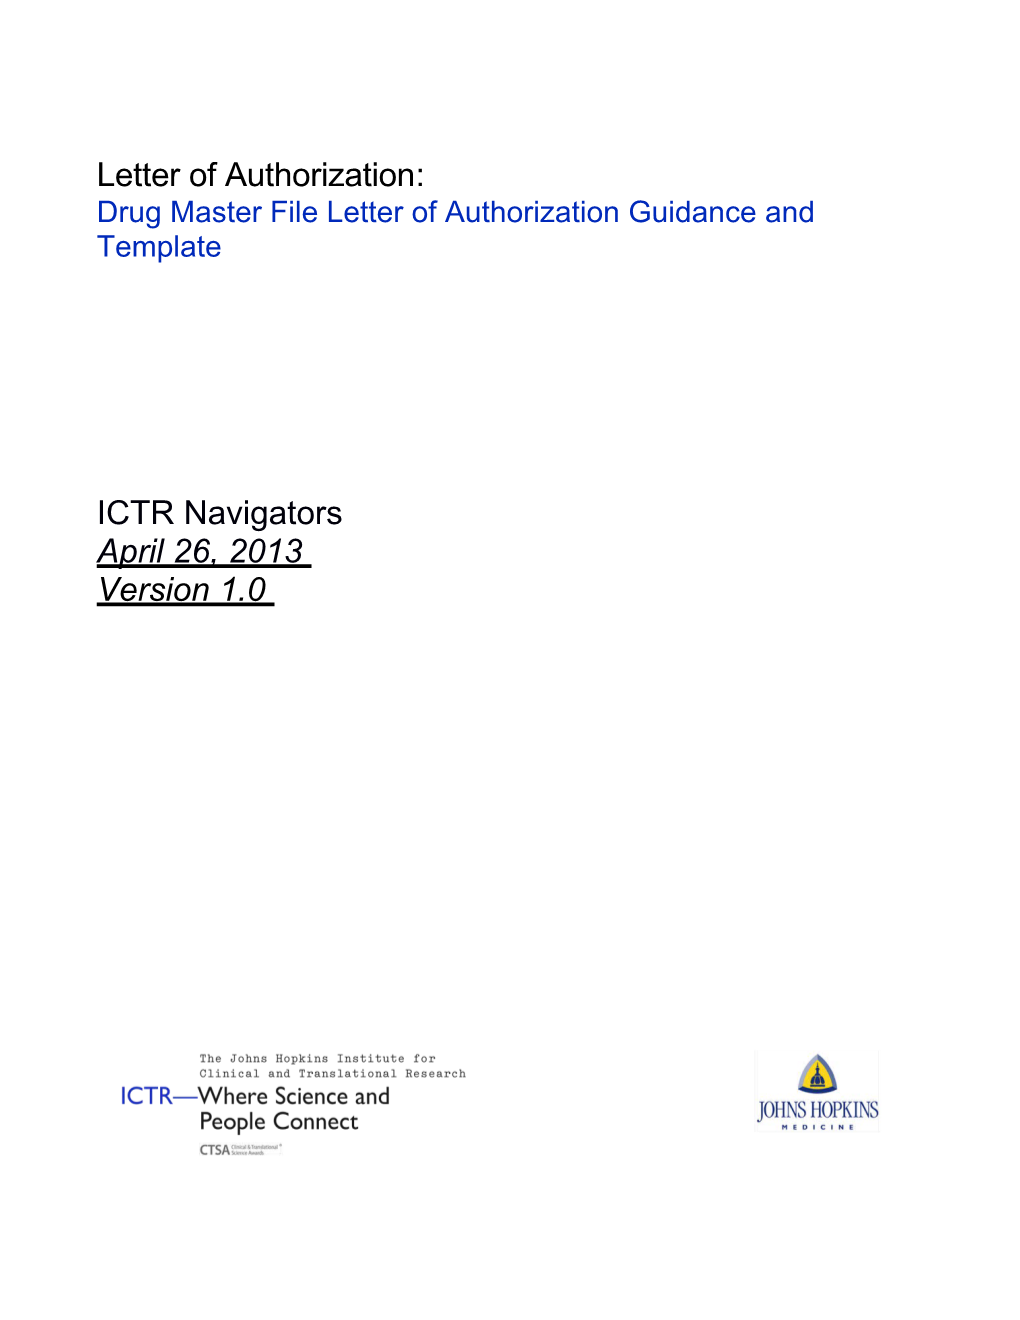 ICTR DDRS: DMF Letter of Authorization Guidance and Template Version 1.0